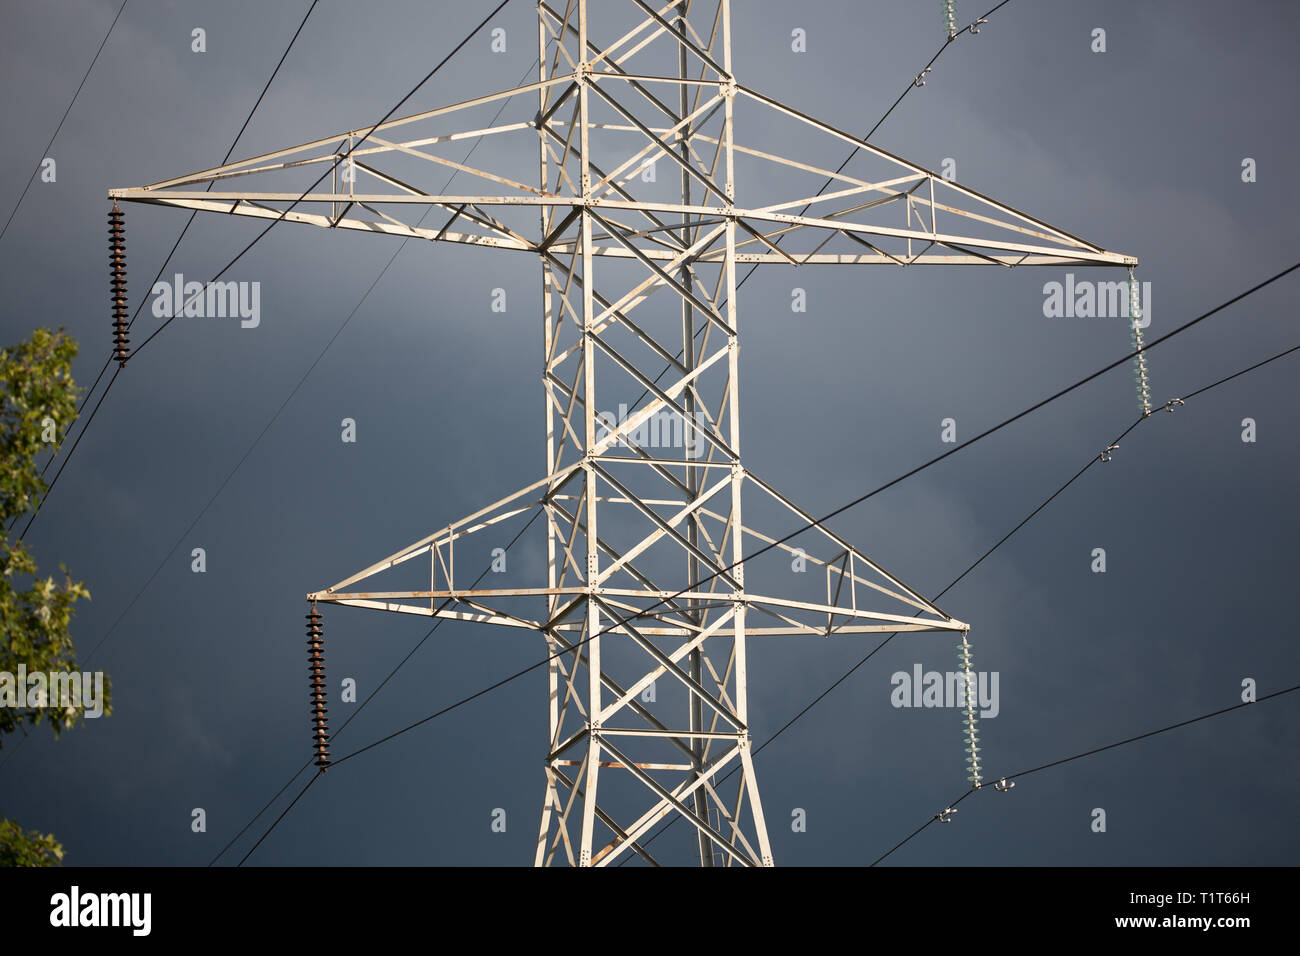 Power Industry Electrical Grid Transmission Lines to Supply Electricity with Tower Wires Stock Photo